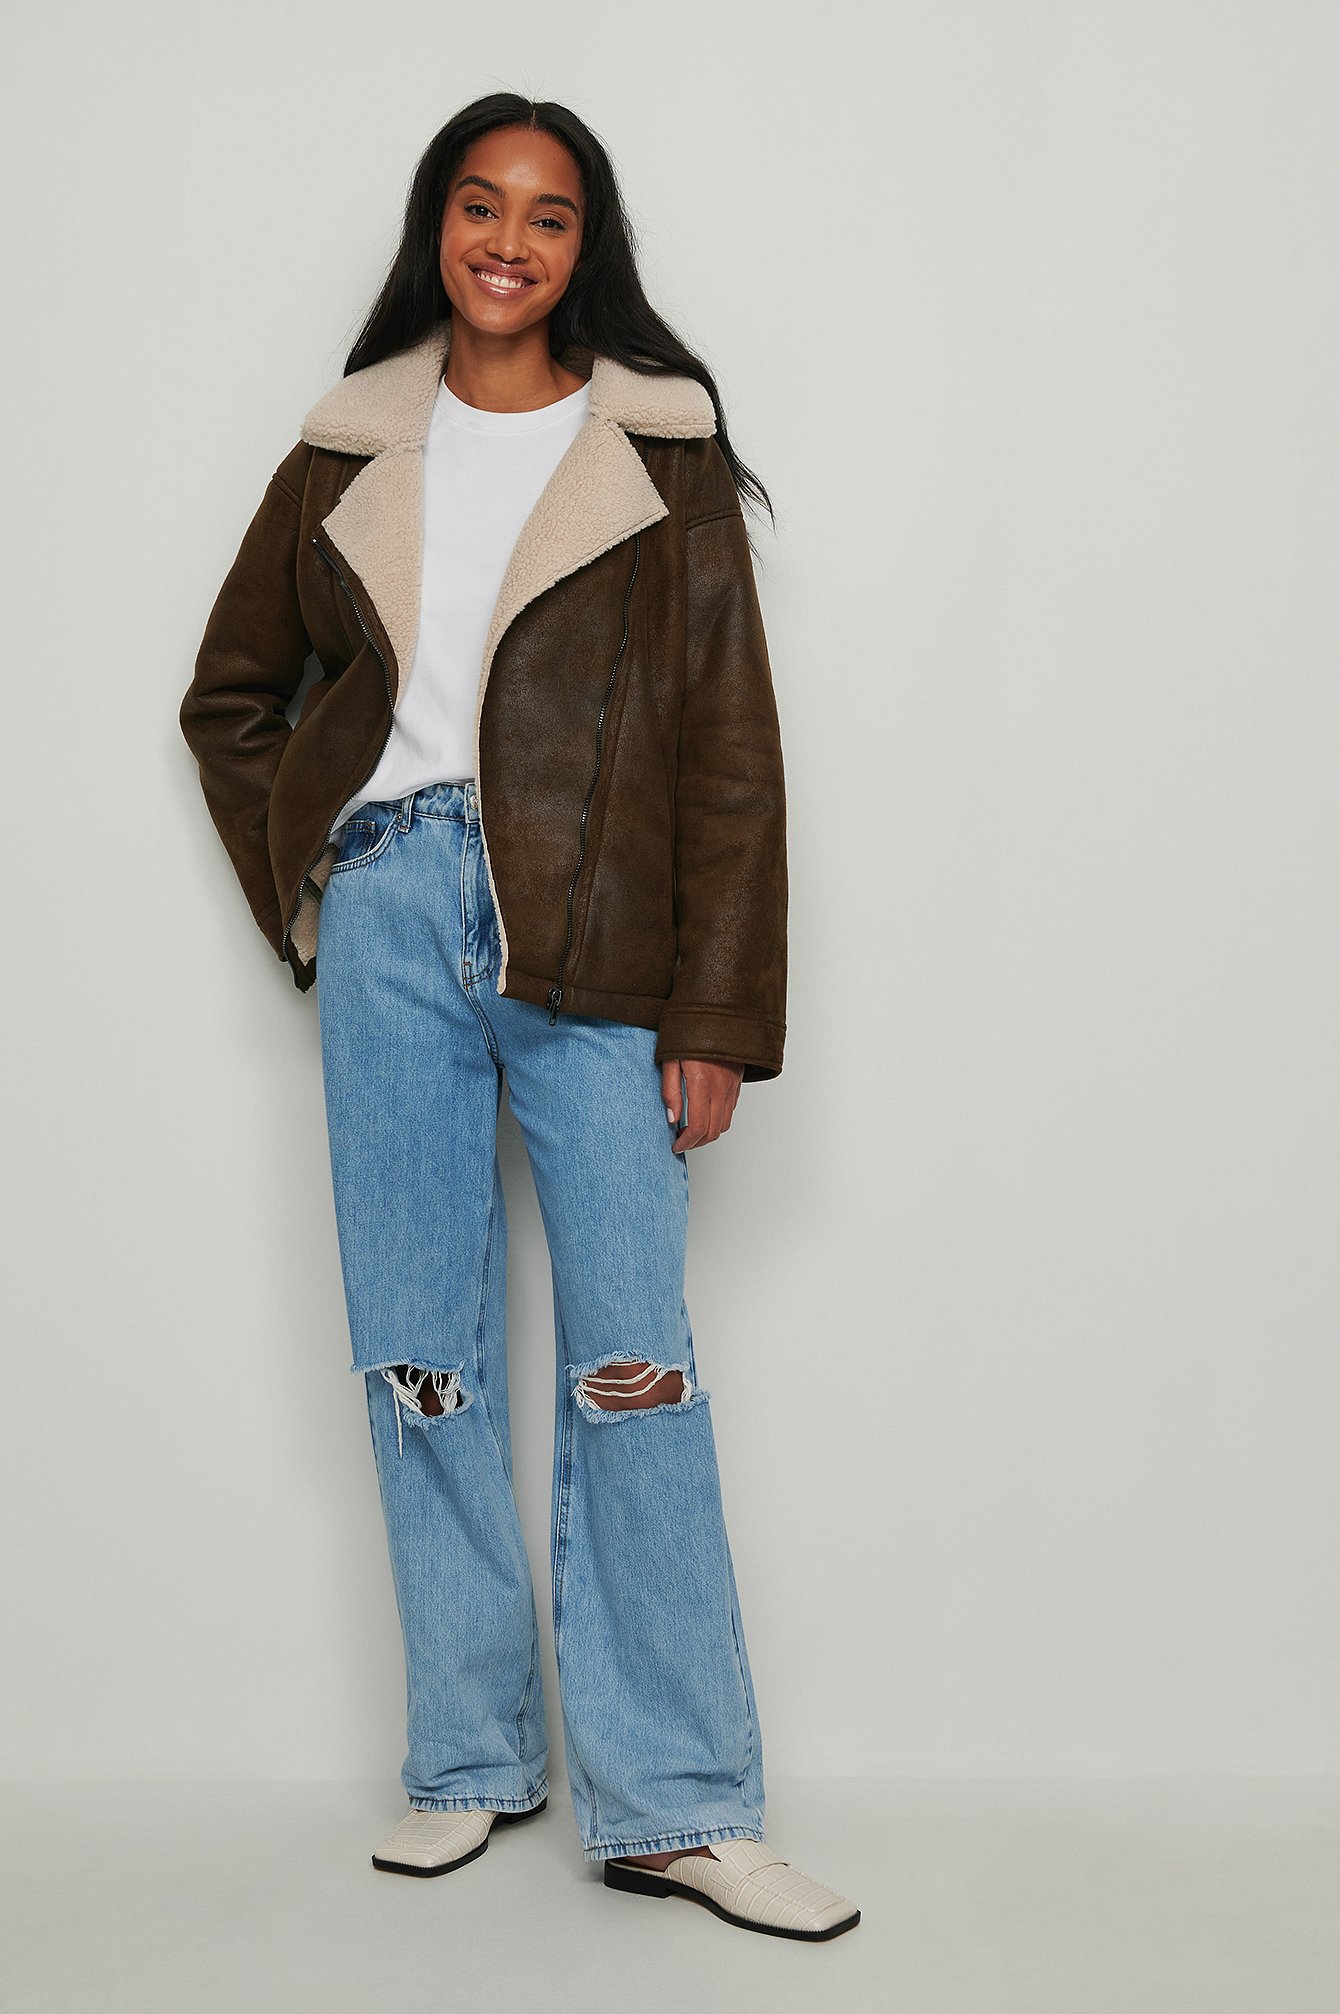 Aviator Bonded Jacket Outfit